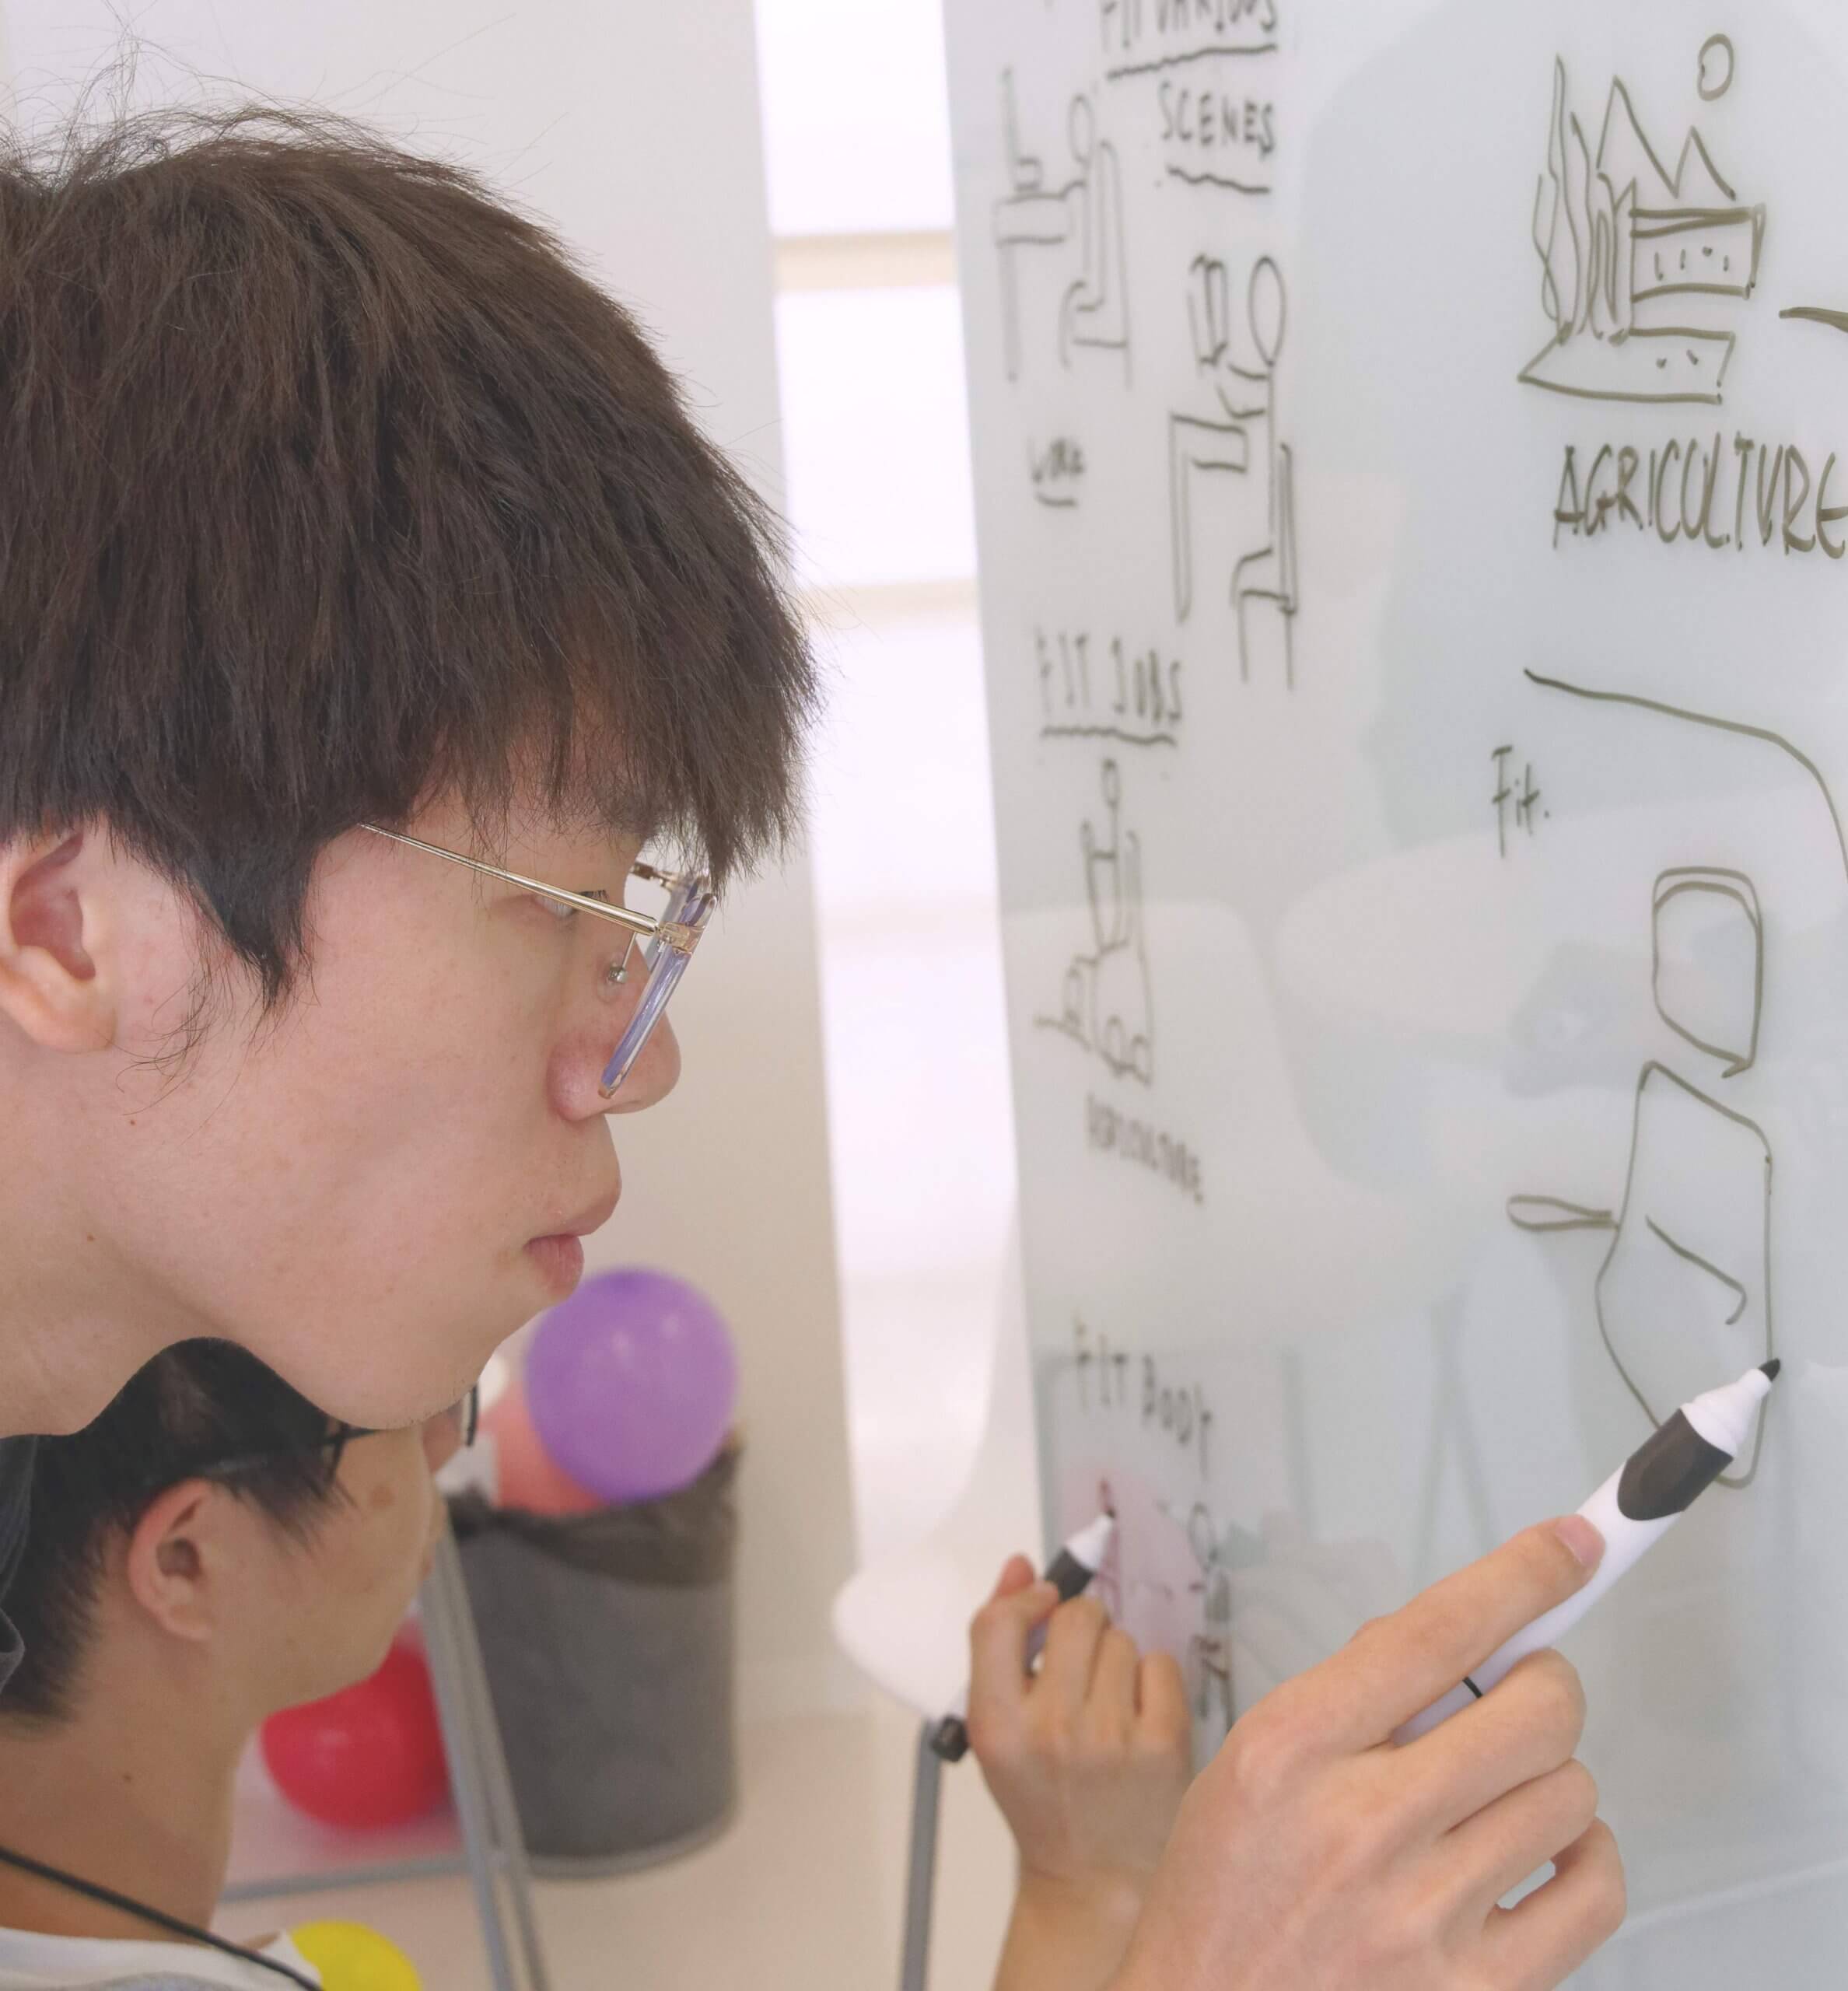 A photo of a student at a whiteboard in a university classroom.